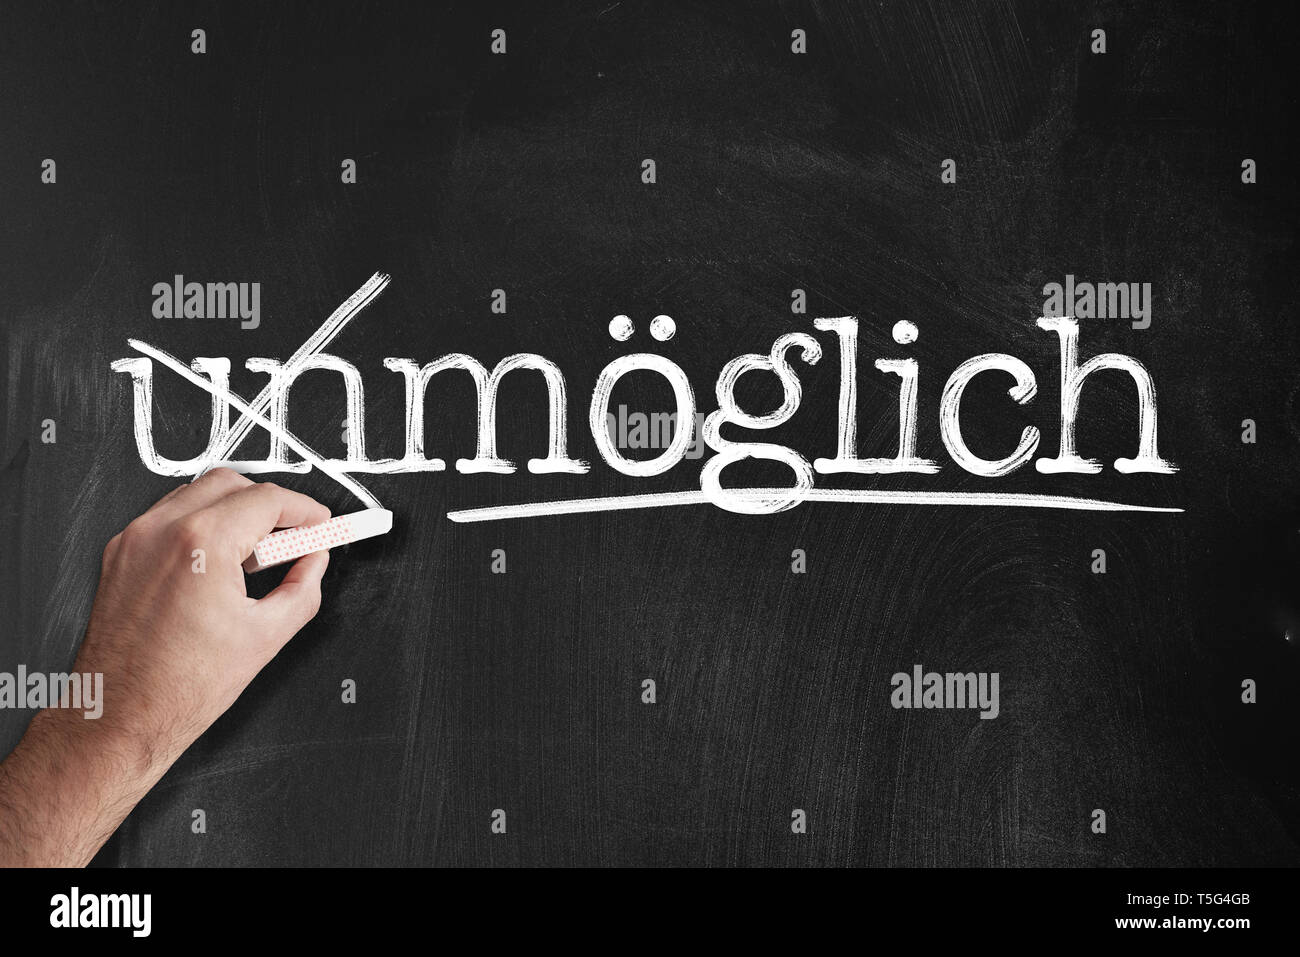 changing word unmöglich to möglich, German for impossible and possible, on chalkboard motivation concept Stock Photo